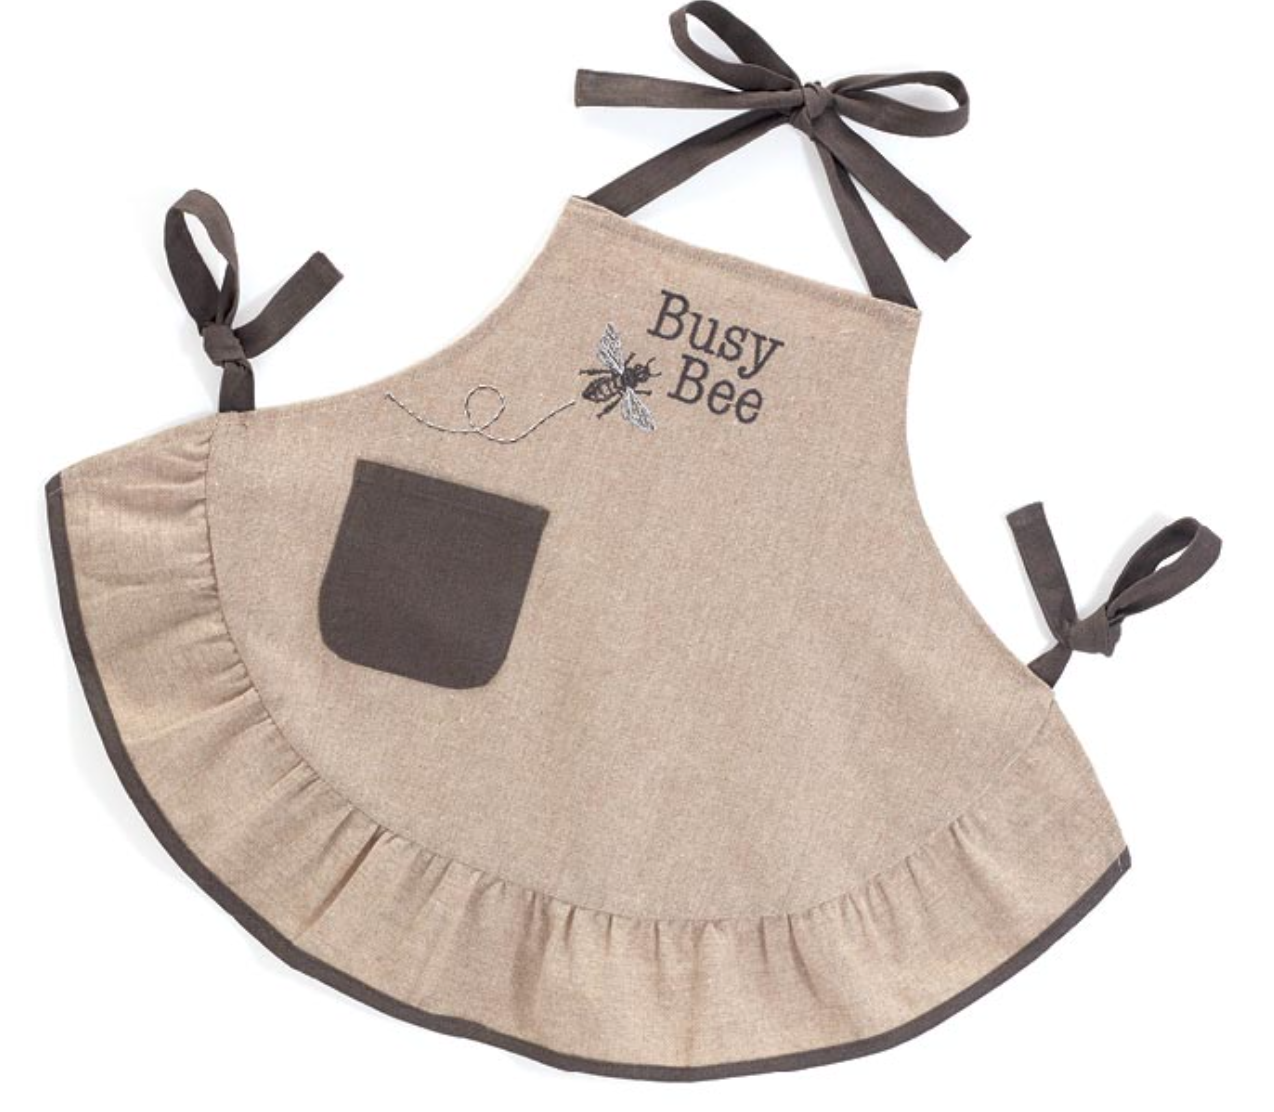 "Busy Bee" Child's Linen Apron